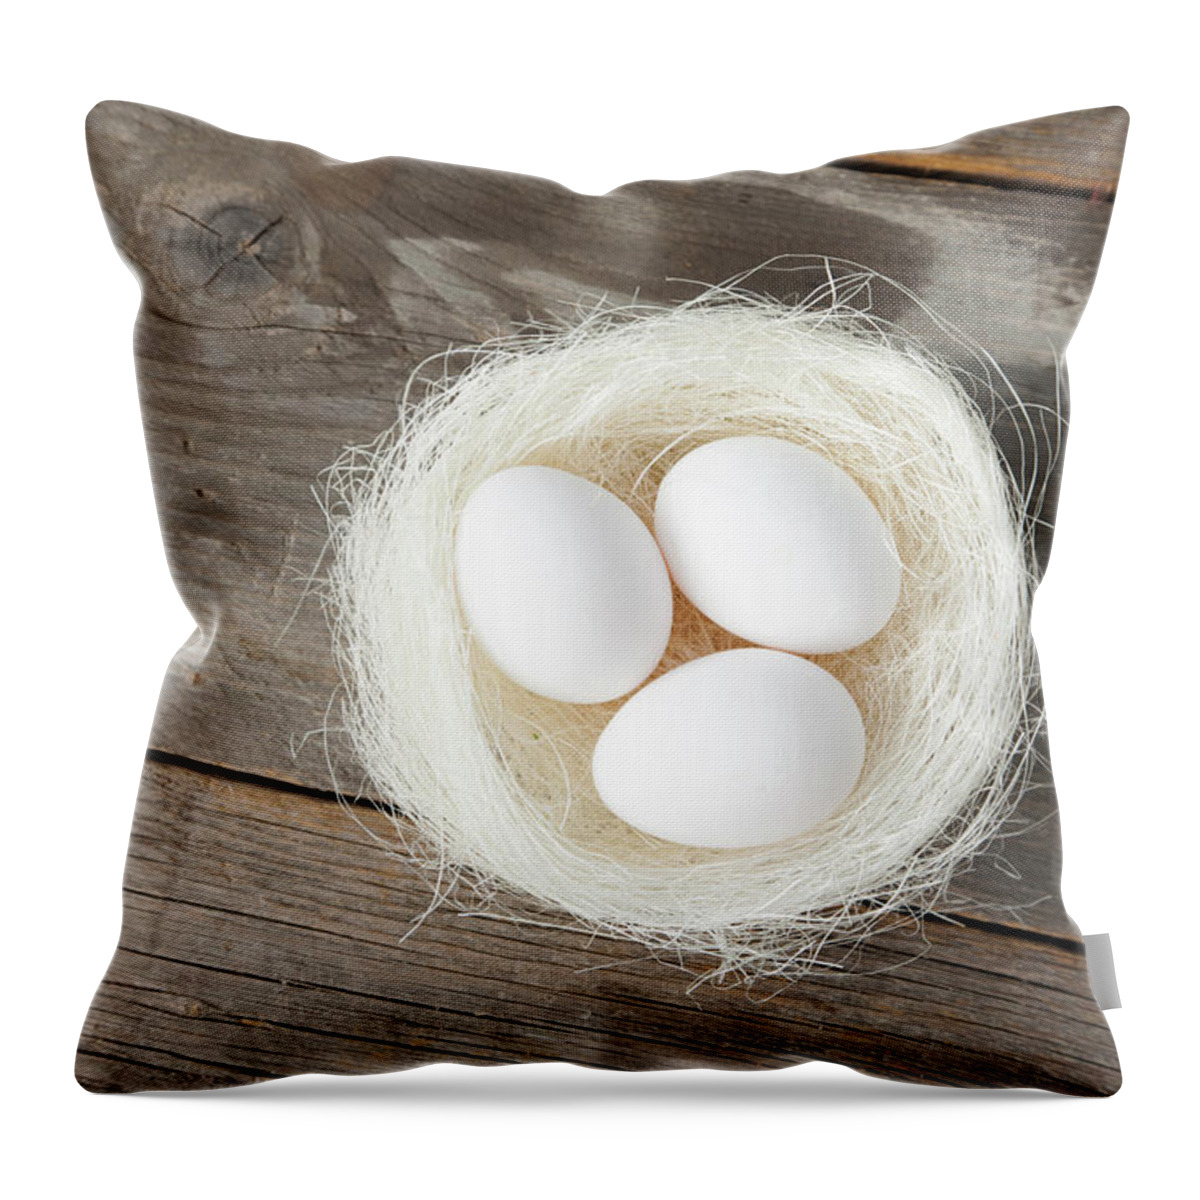 Bavaria Throw Pillow featuring the photograph Eggs In Nest On Wooden Counter by Stefanie Grewel